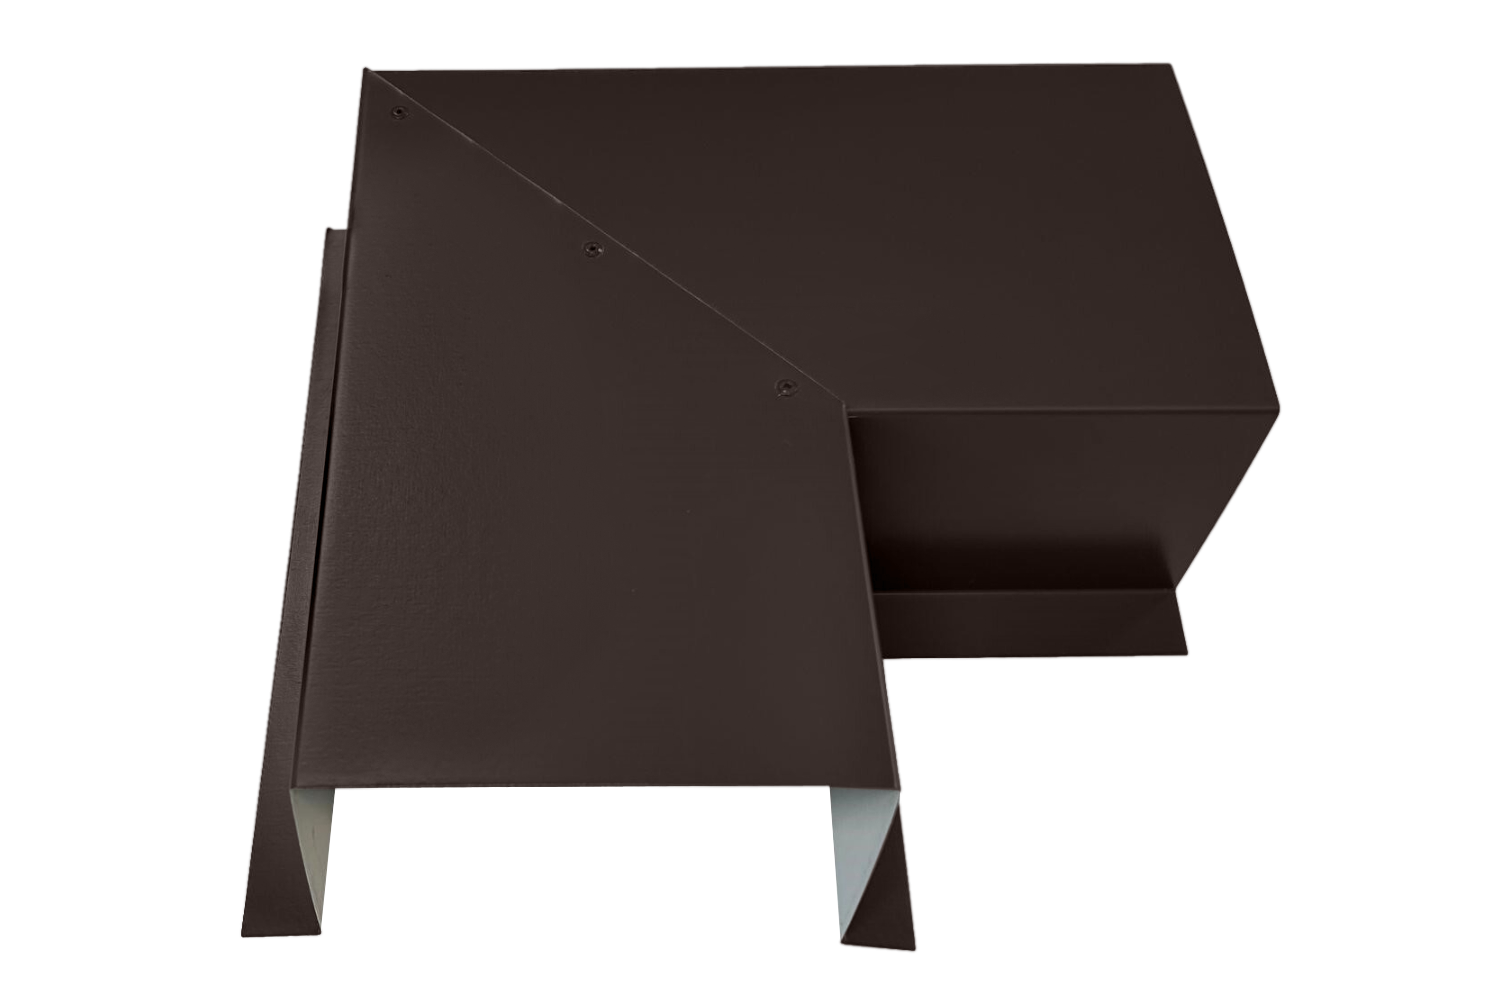 A brown, angular metal object resembling a folded or bent sheet. Made of premium quality 24 gauge steel, the object has sharp edges and appears to be a part of a structural or architectural component, possibly an HVAC line set cover. This is the Perma Cover Commercial Series - 24 Gauge Line Set Cover Side Turning Elbows - Premium Quality. The background is plain white.